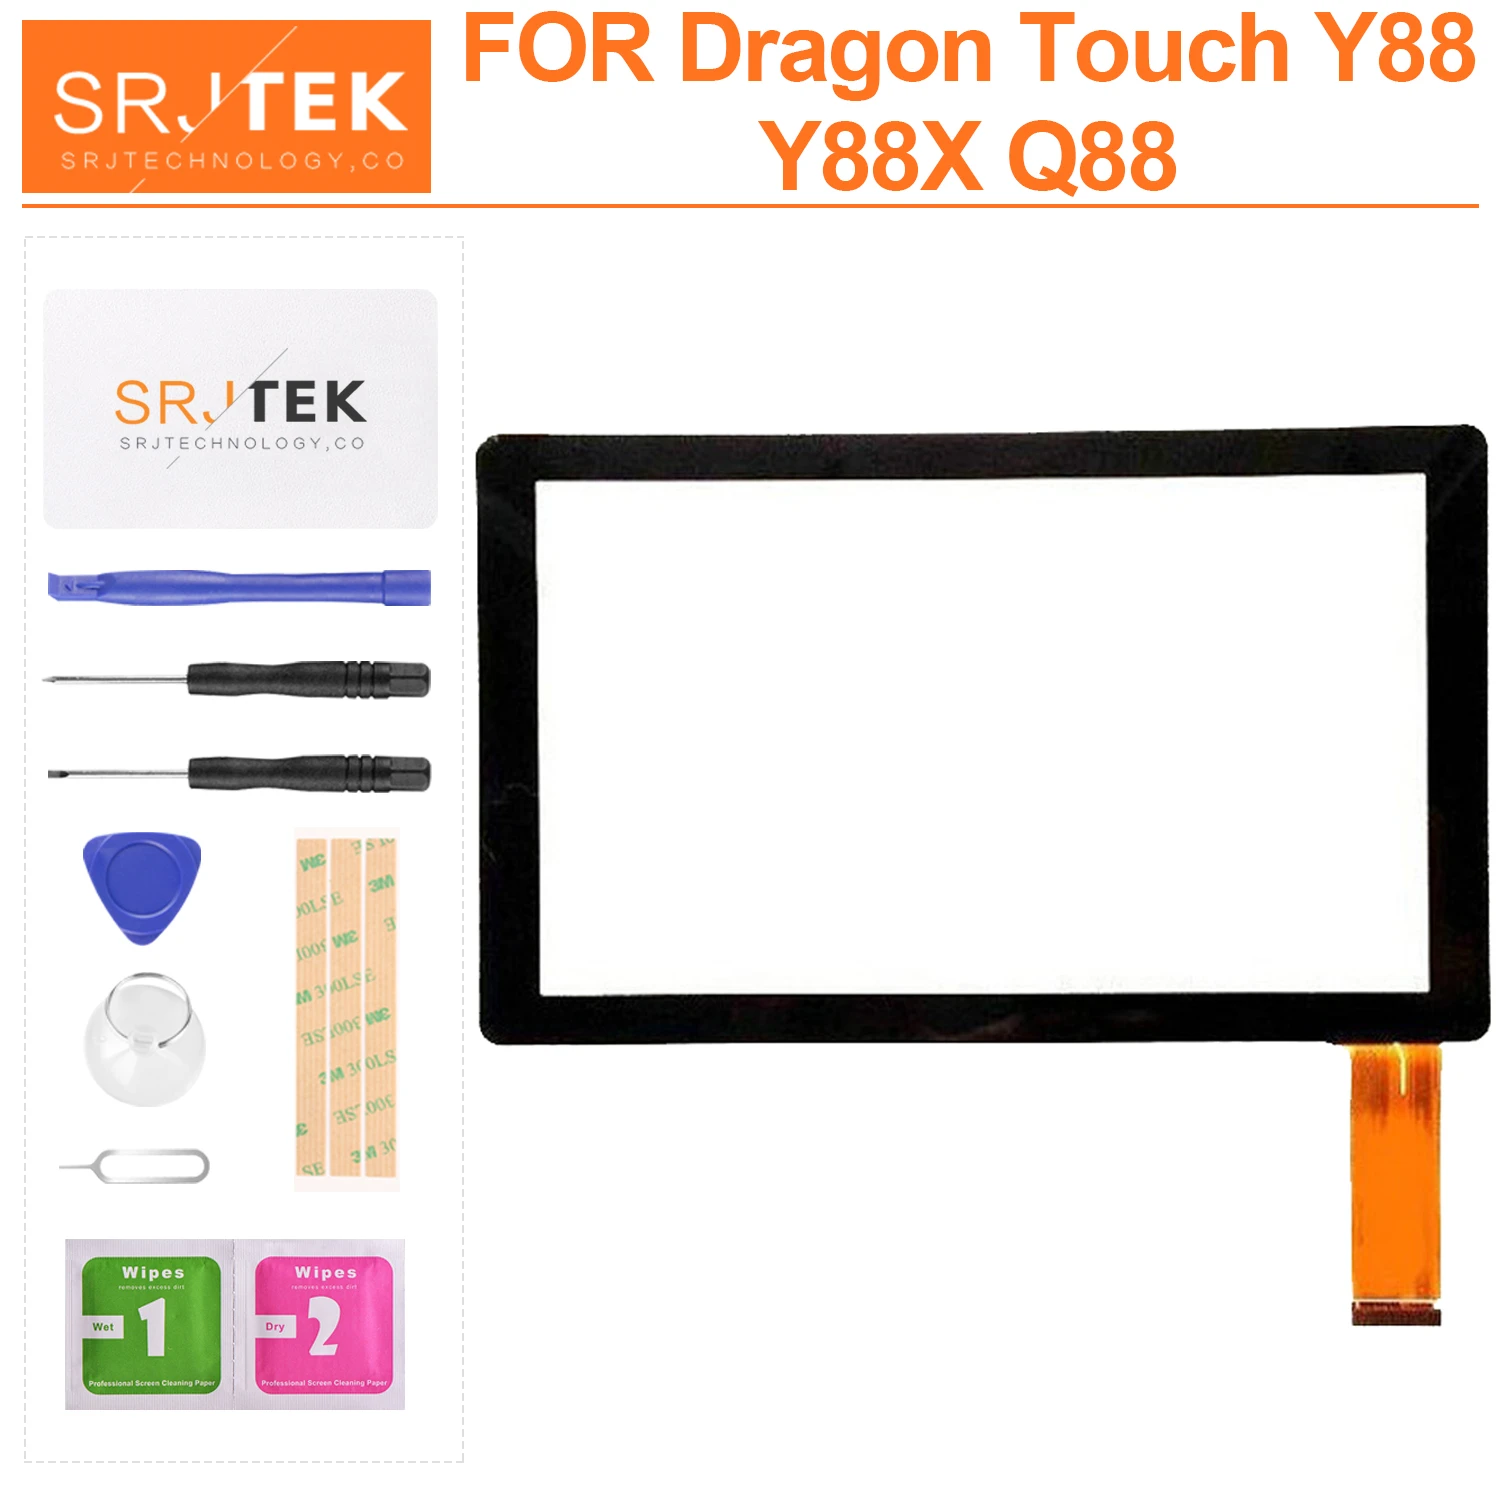 For Dragon Touch Y88 Y88X Q88 Tablet PC External Capacitive Touch Screen Digitizer Assembly Replacement Outer Glass Sensor Panel